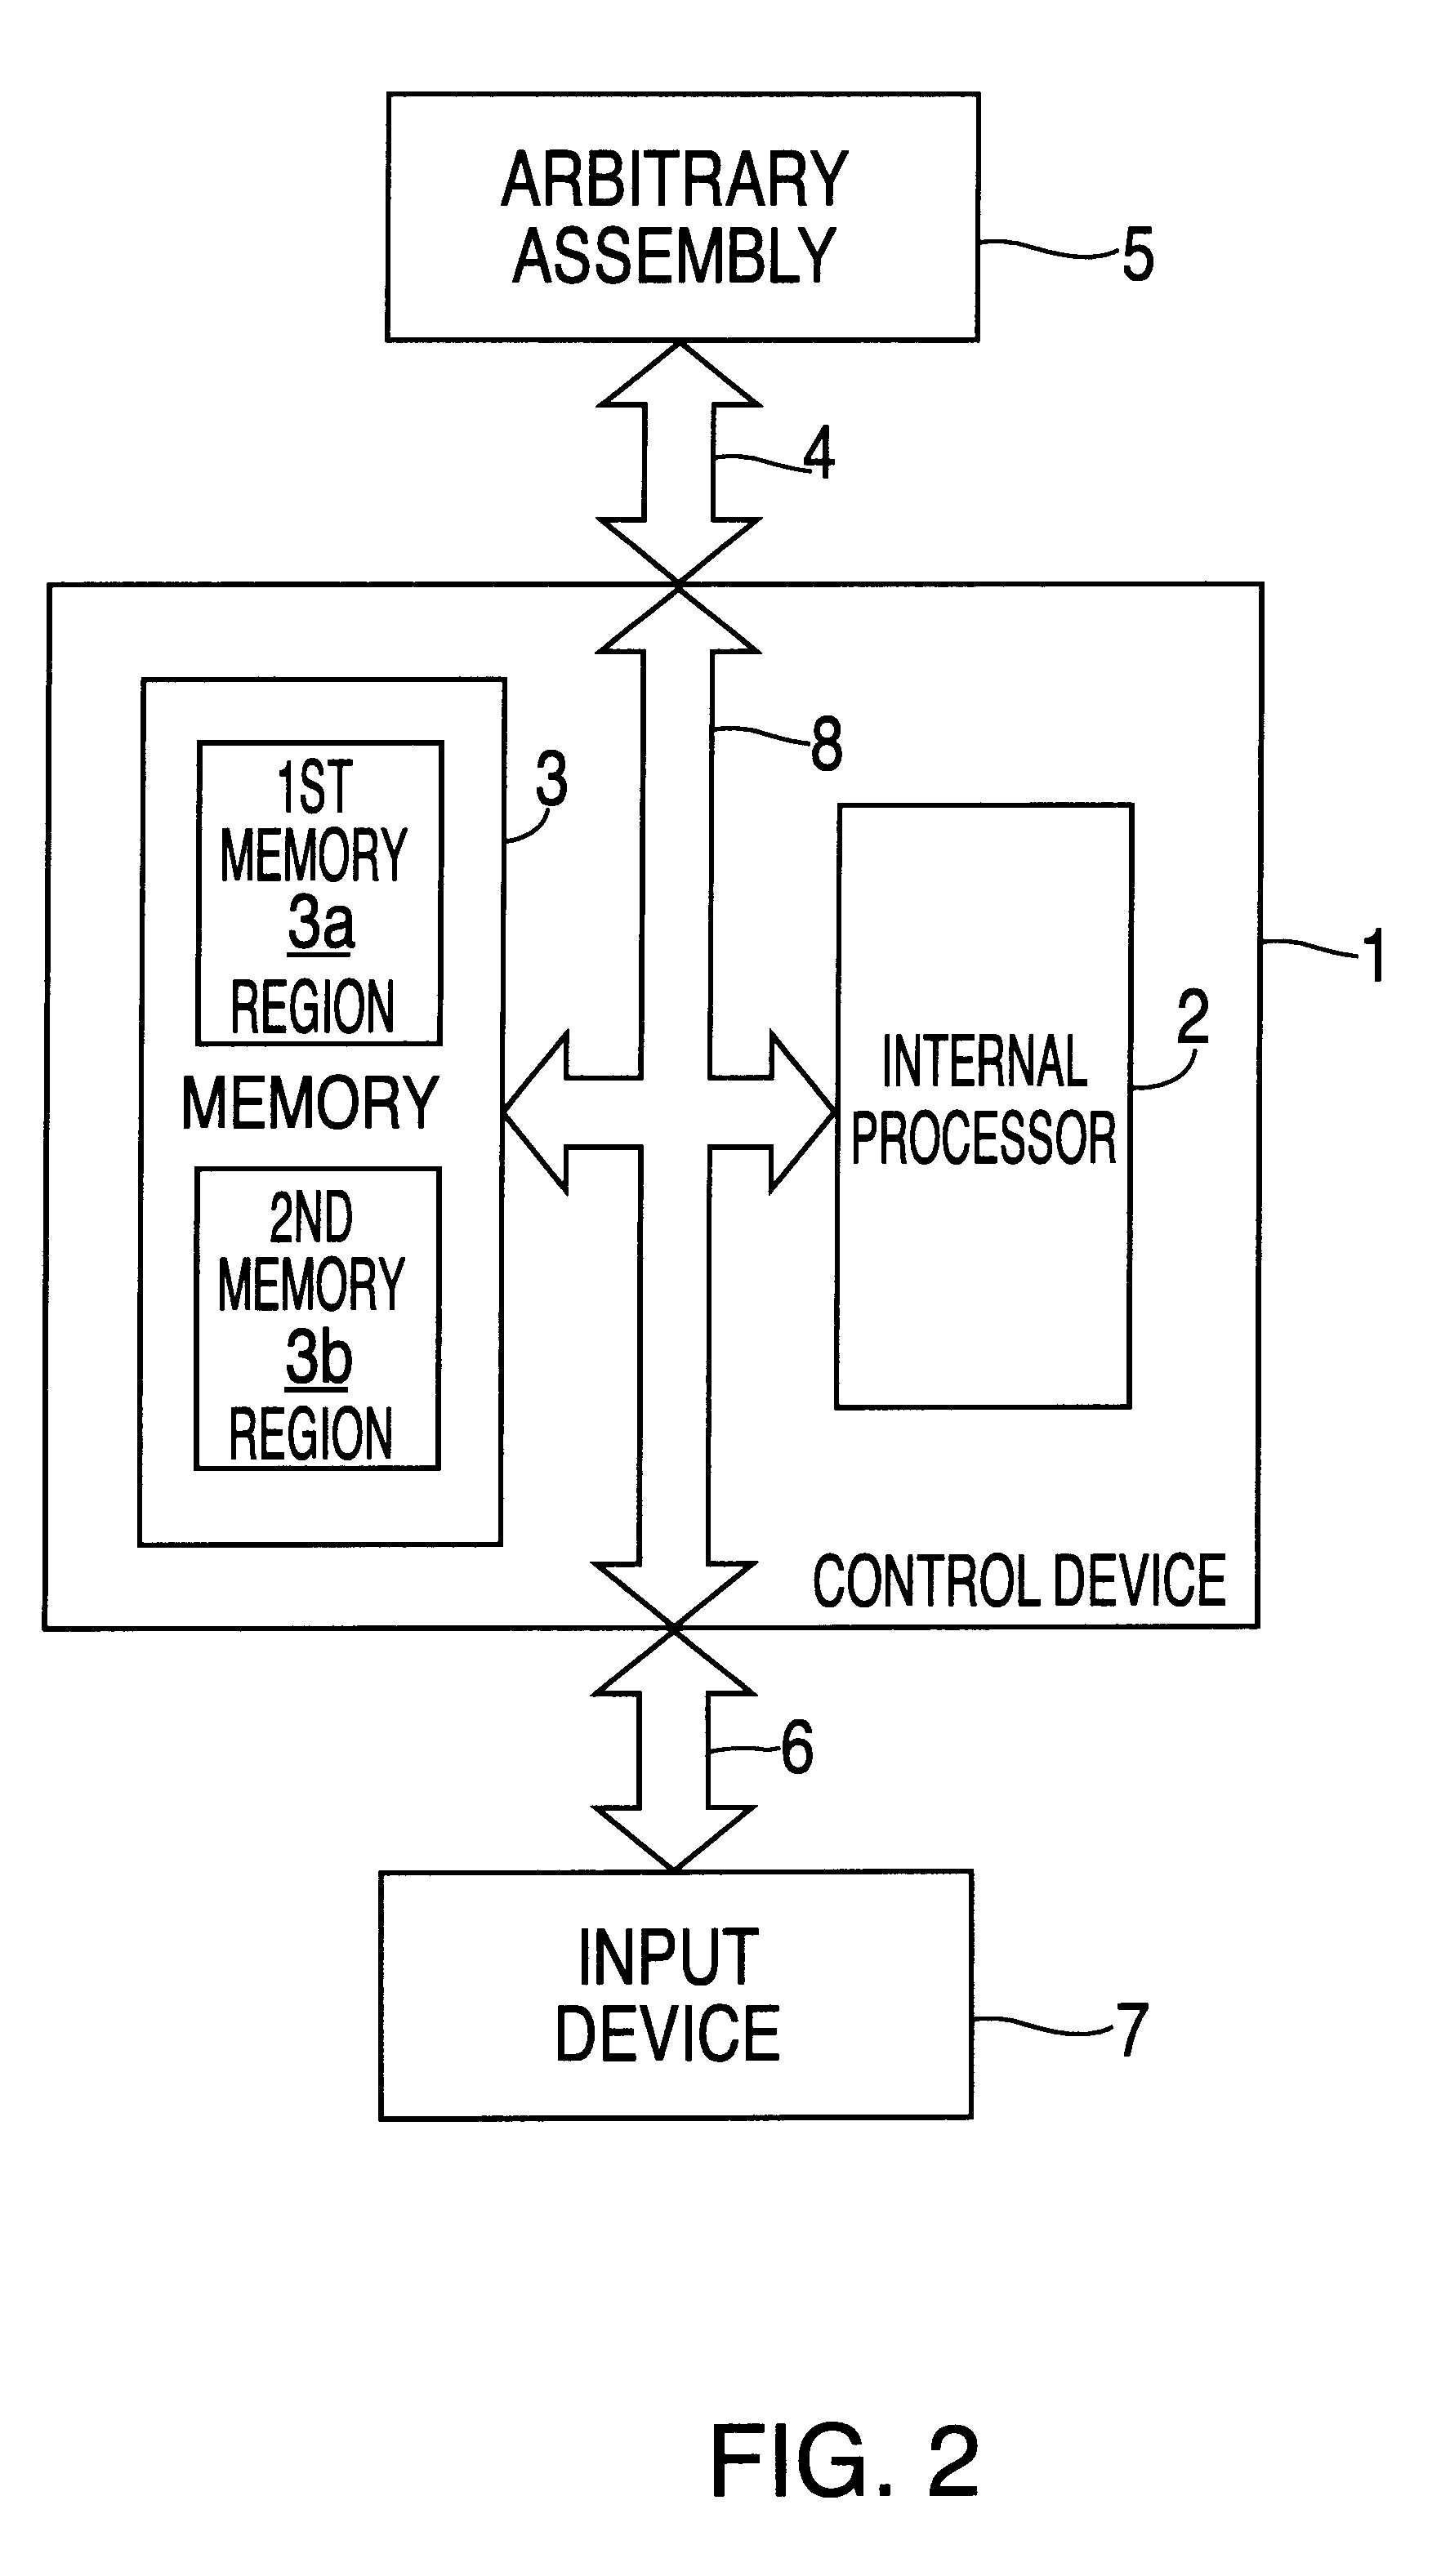 Method for simulating control functions of a control device